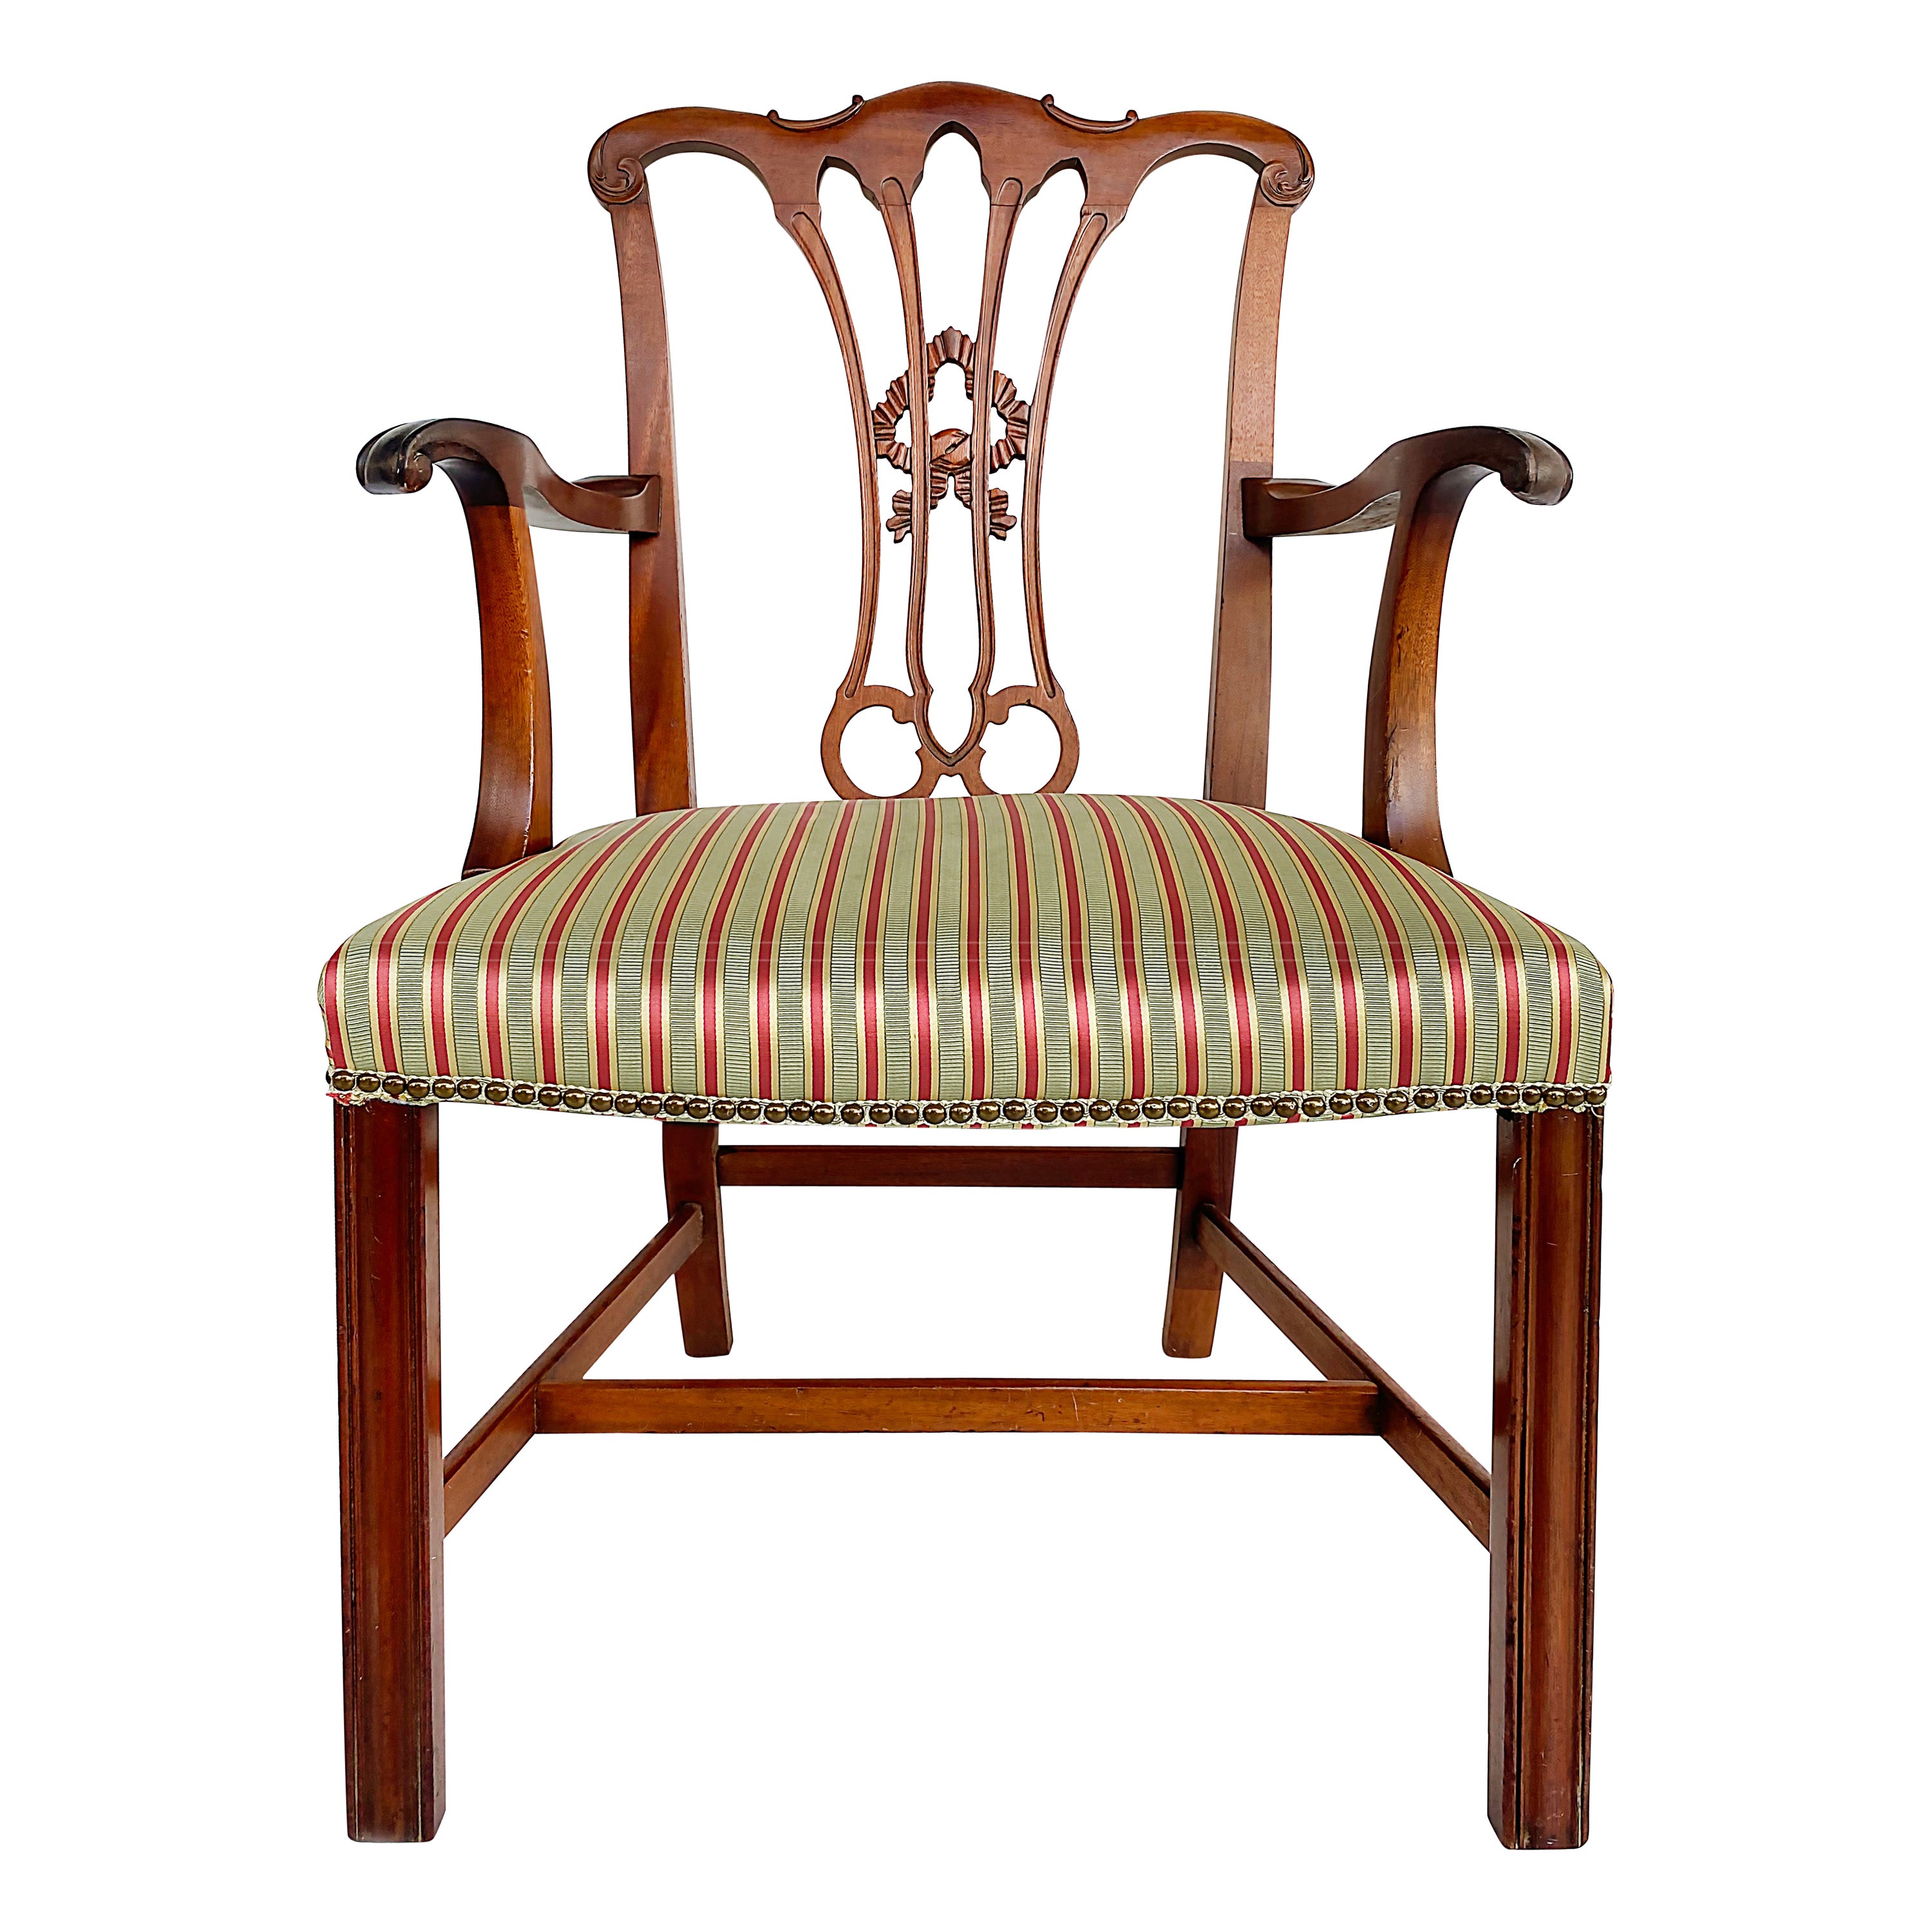 Chippendale Style Mahogany Slat Back Armchair with Upholstered Seat Cushion